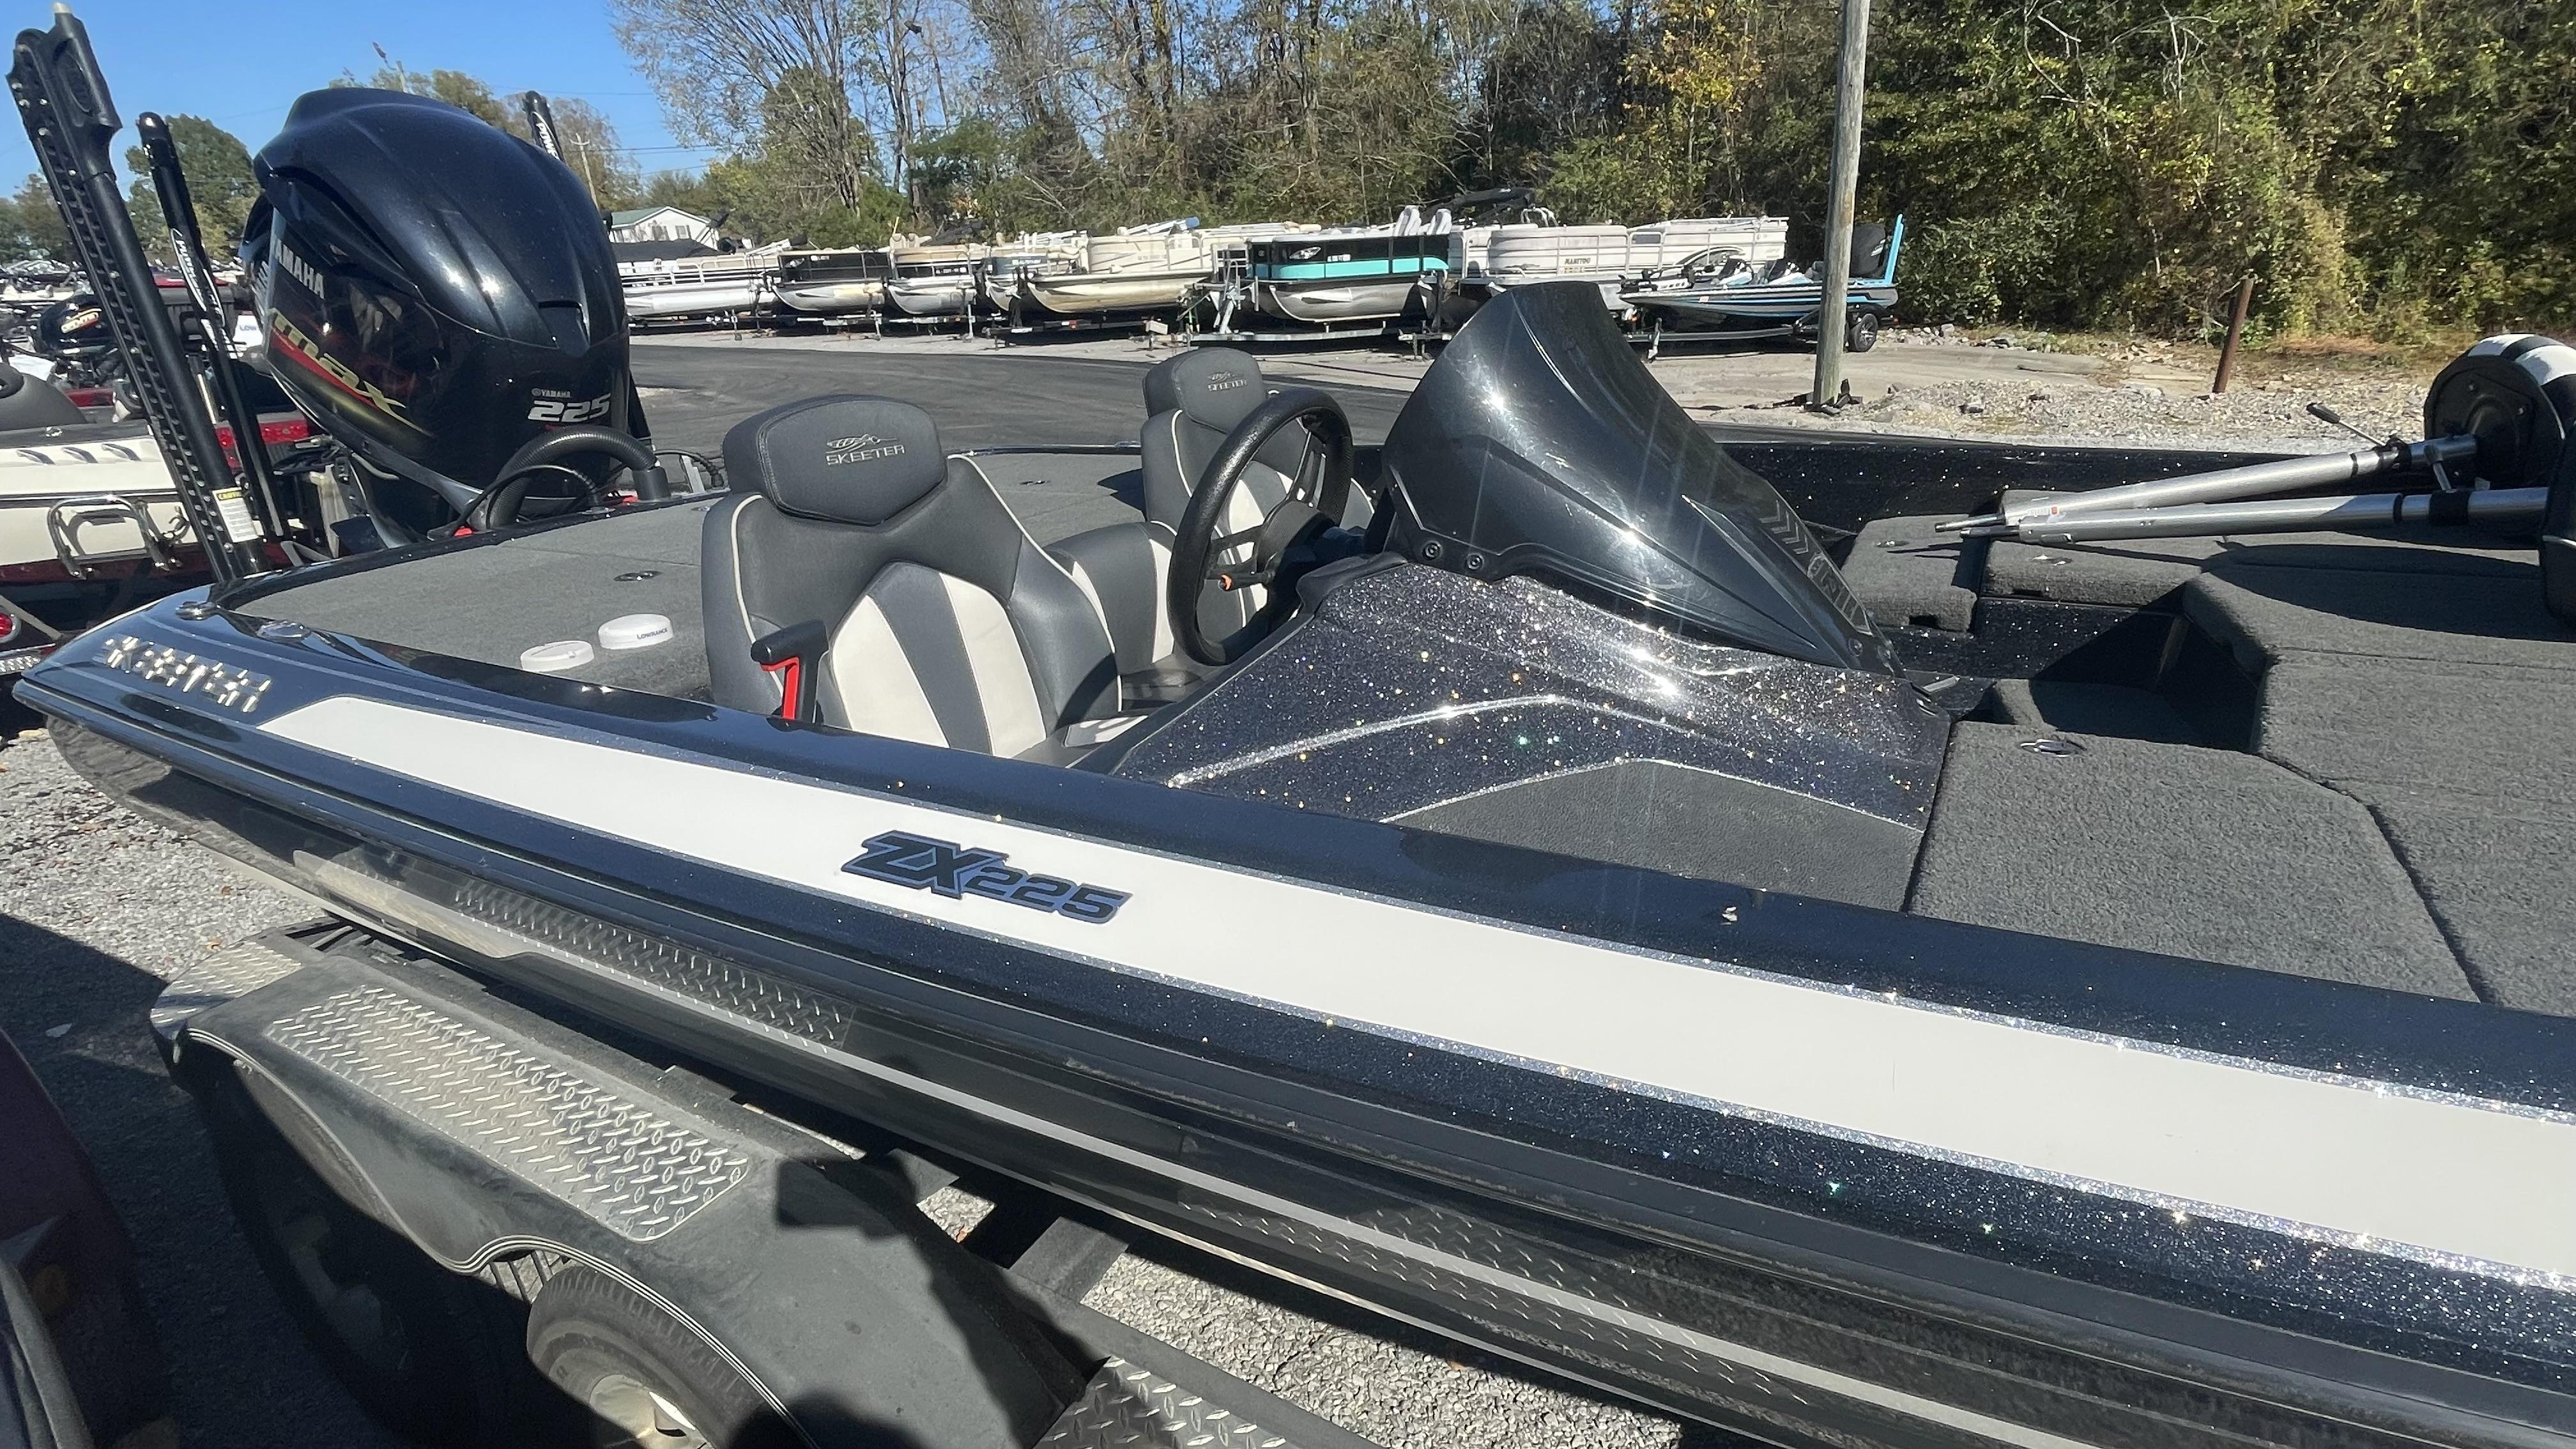 Skeeter ZX 225 boats for sale - boats.com